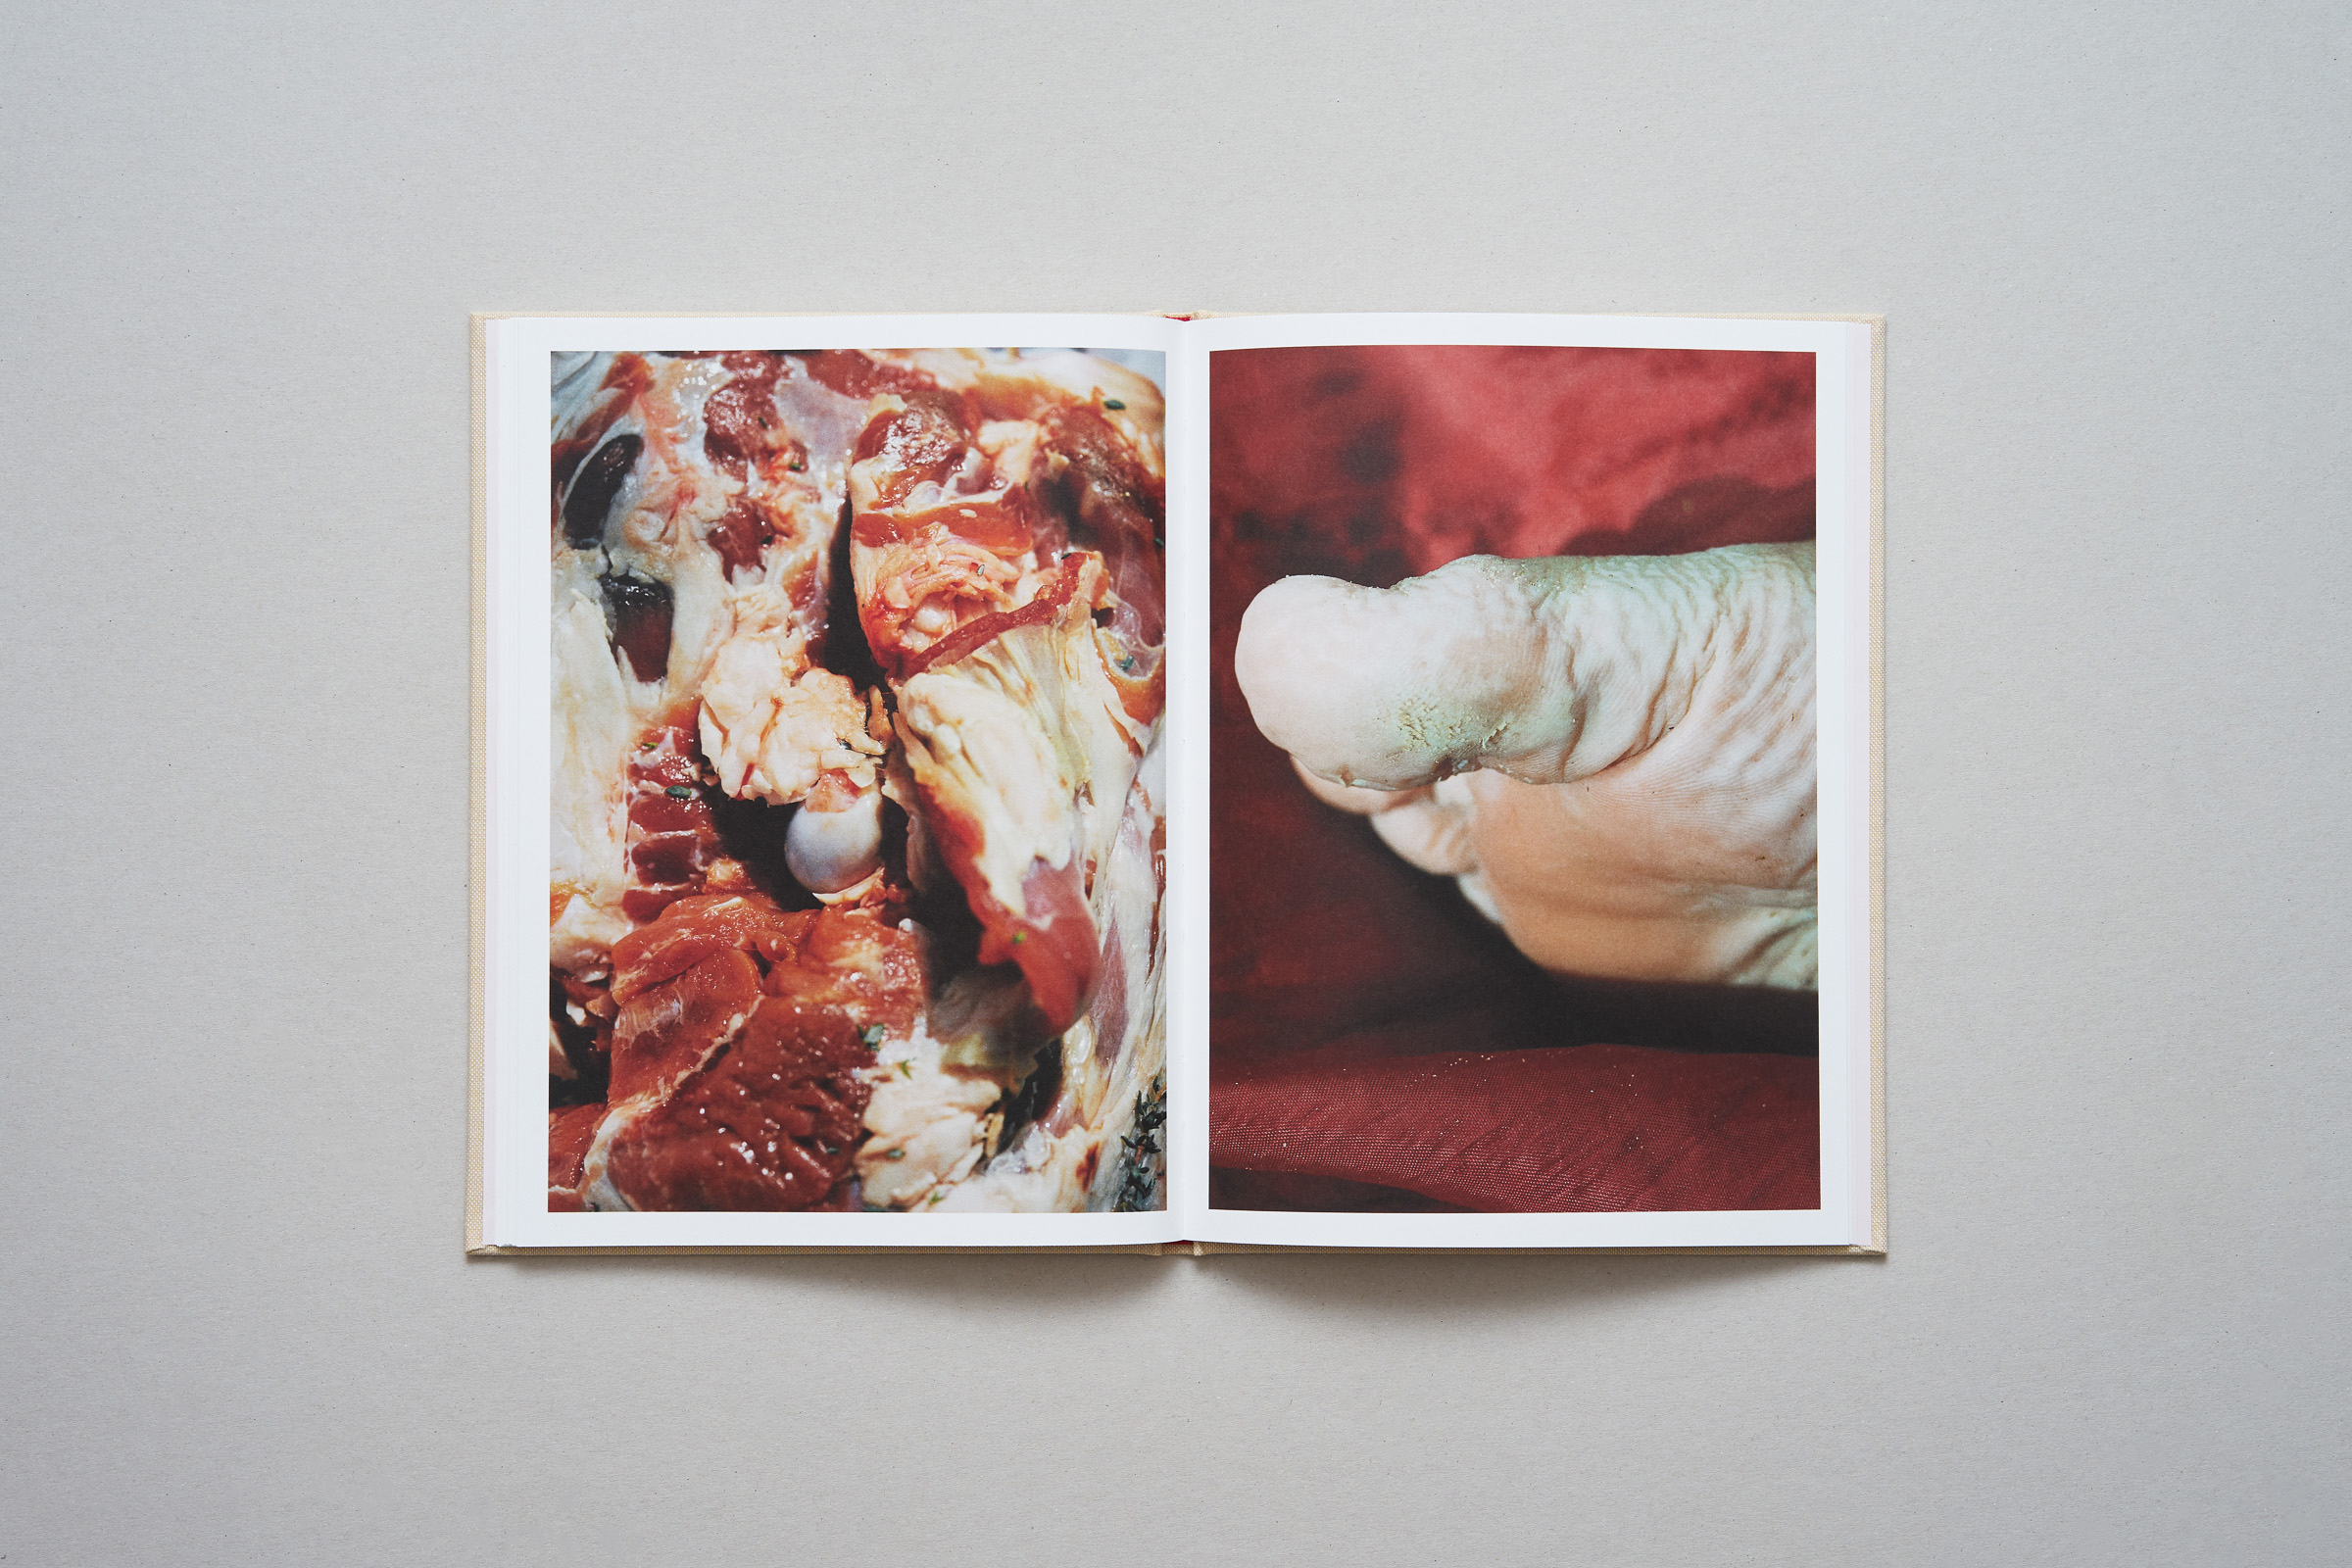 Lucile Boiron — Womb